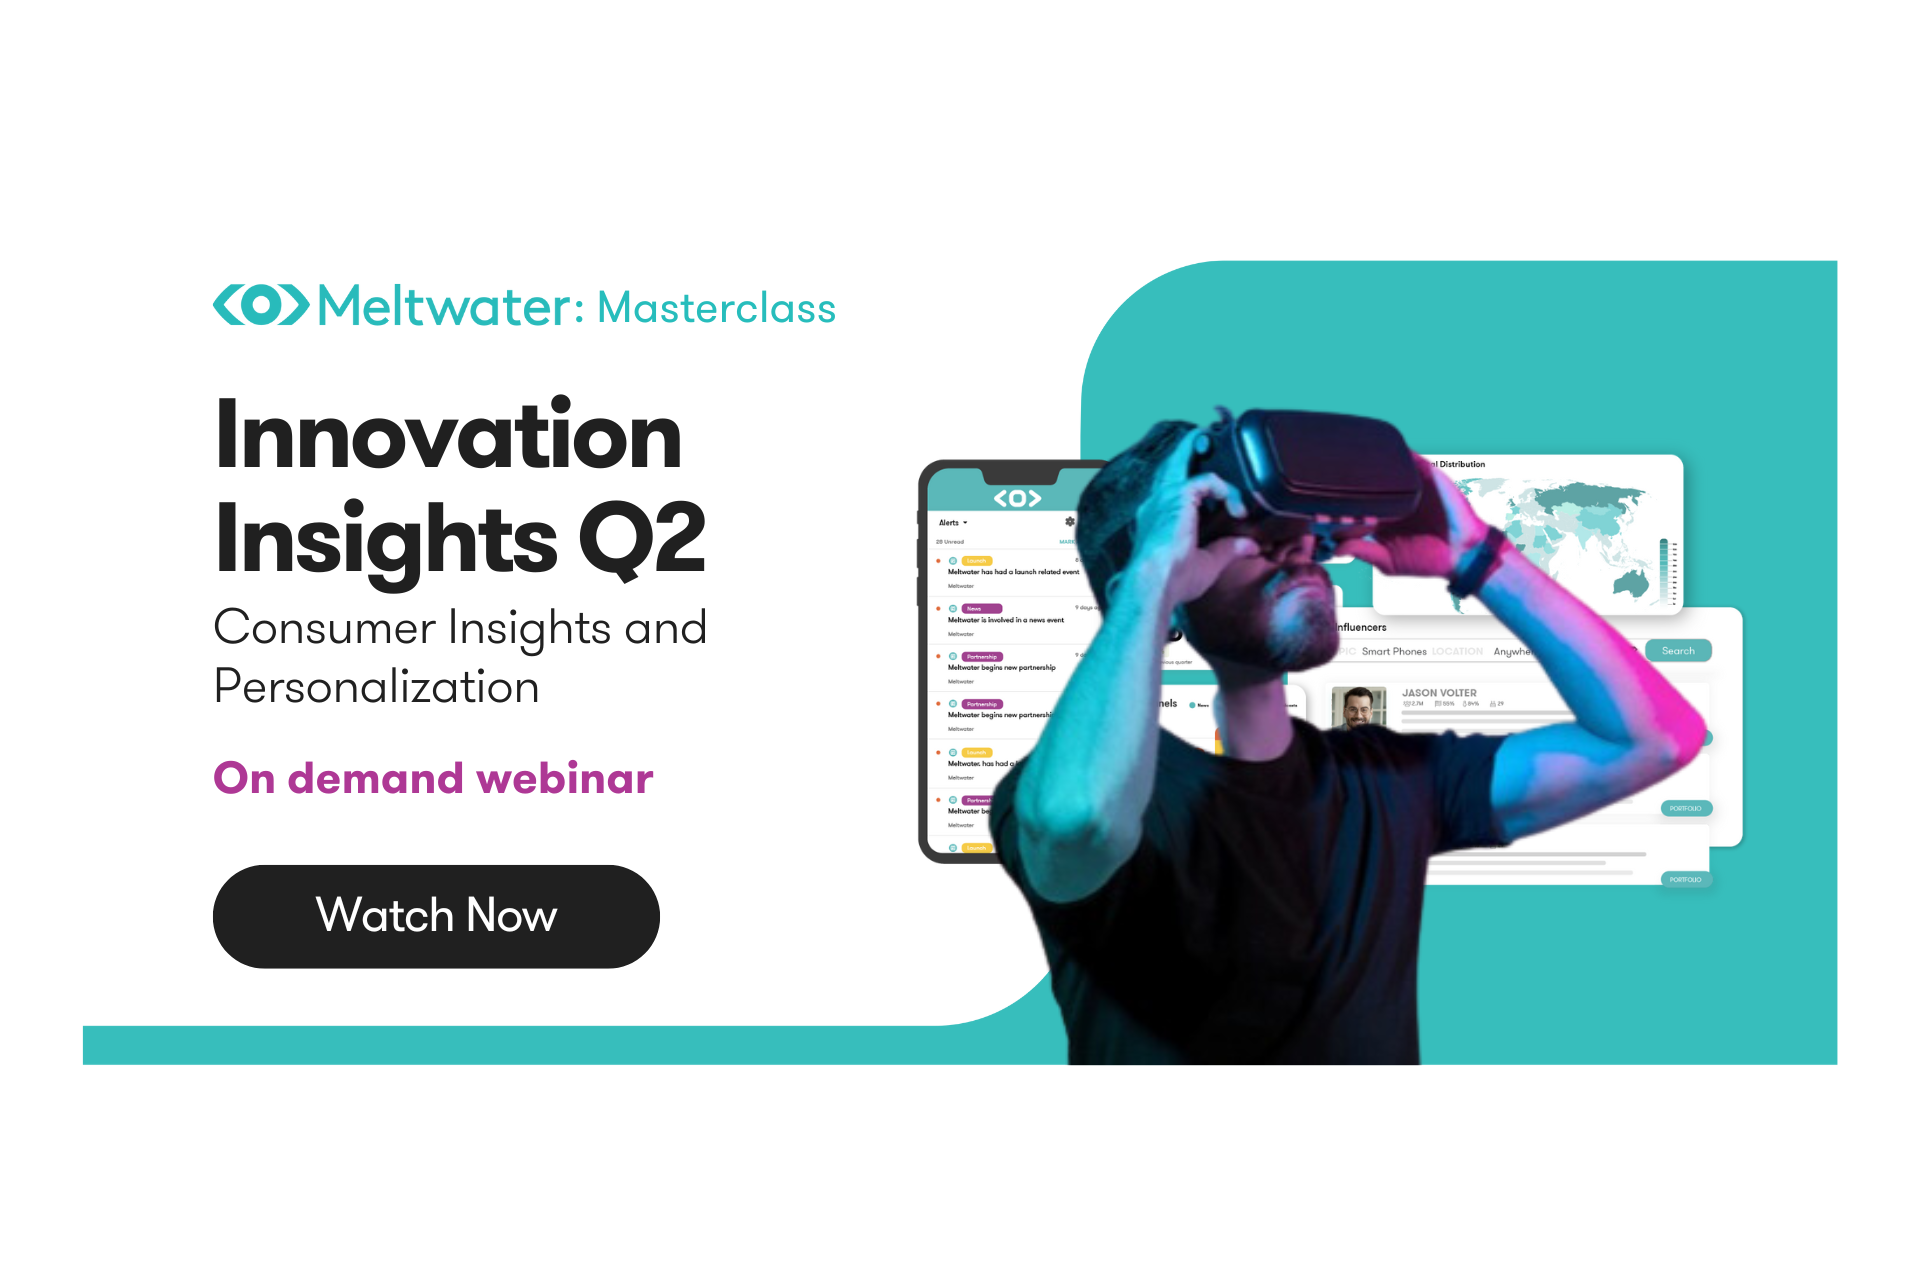 This is a promotional banner highlighting the innovation insights Q2 masterclass